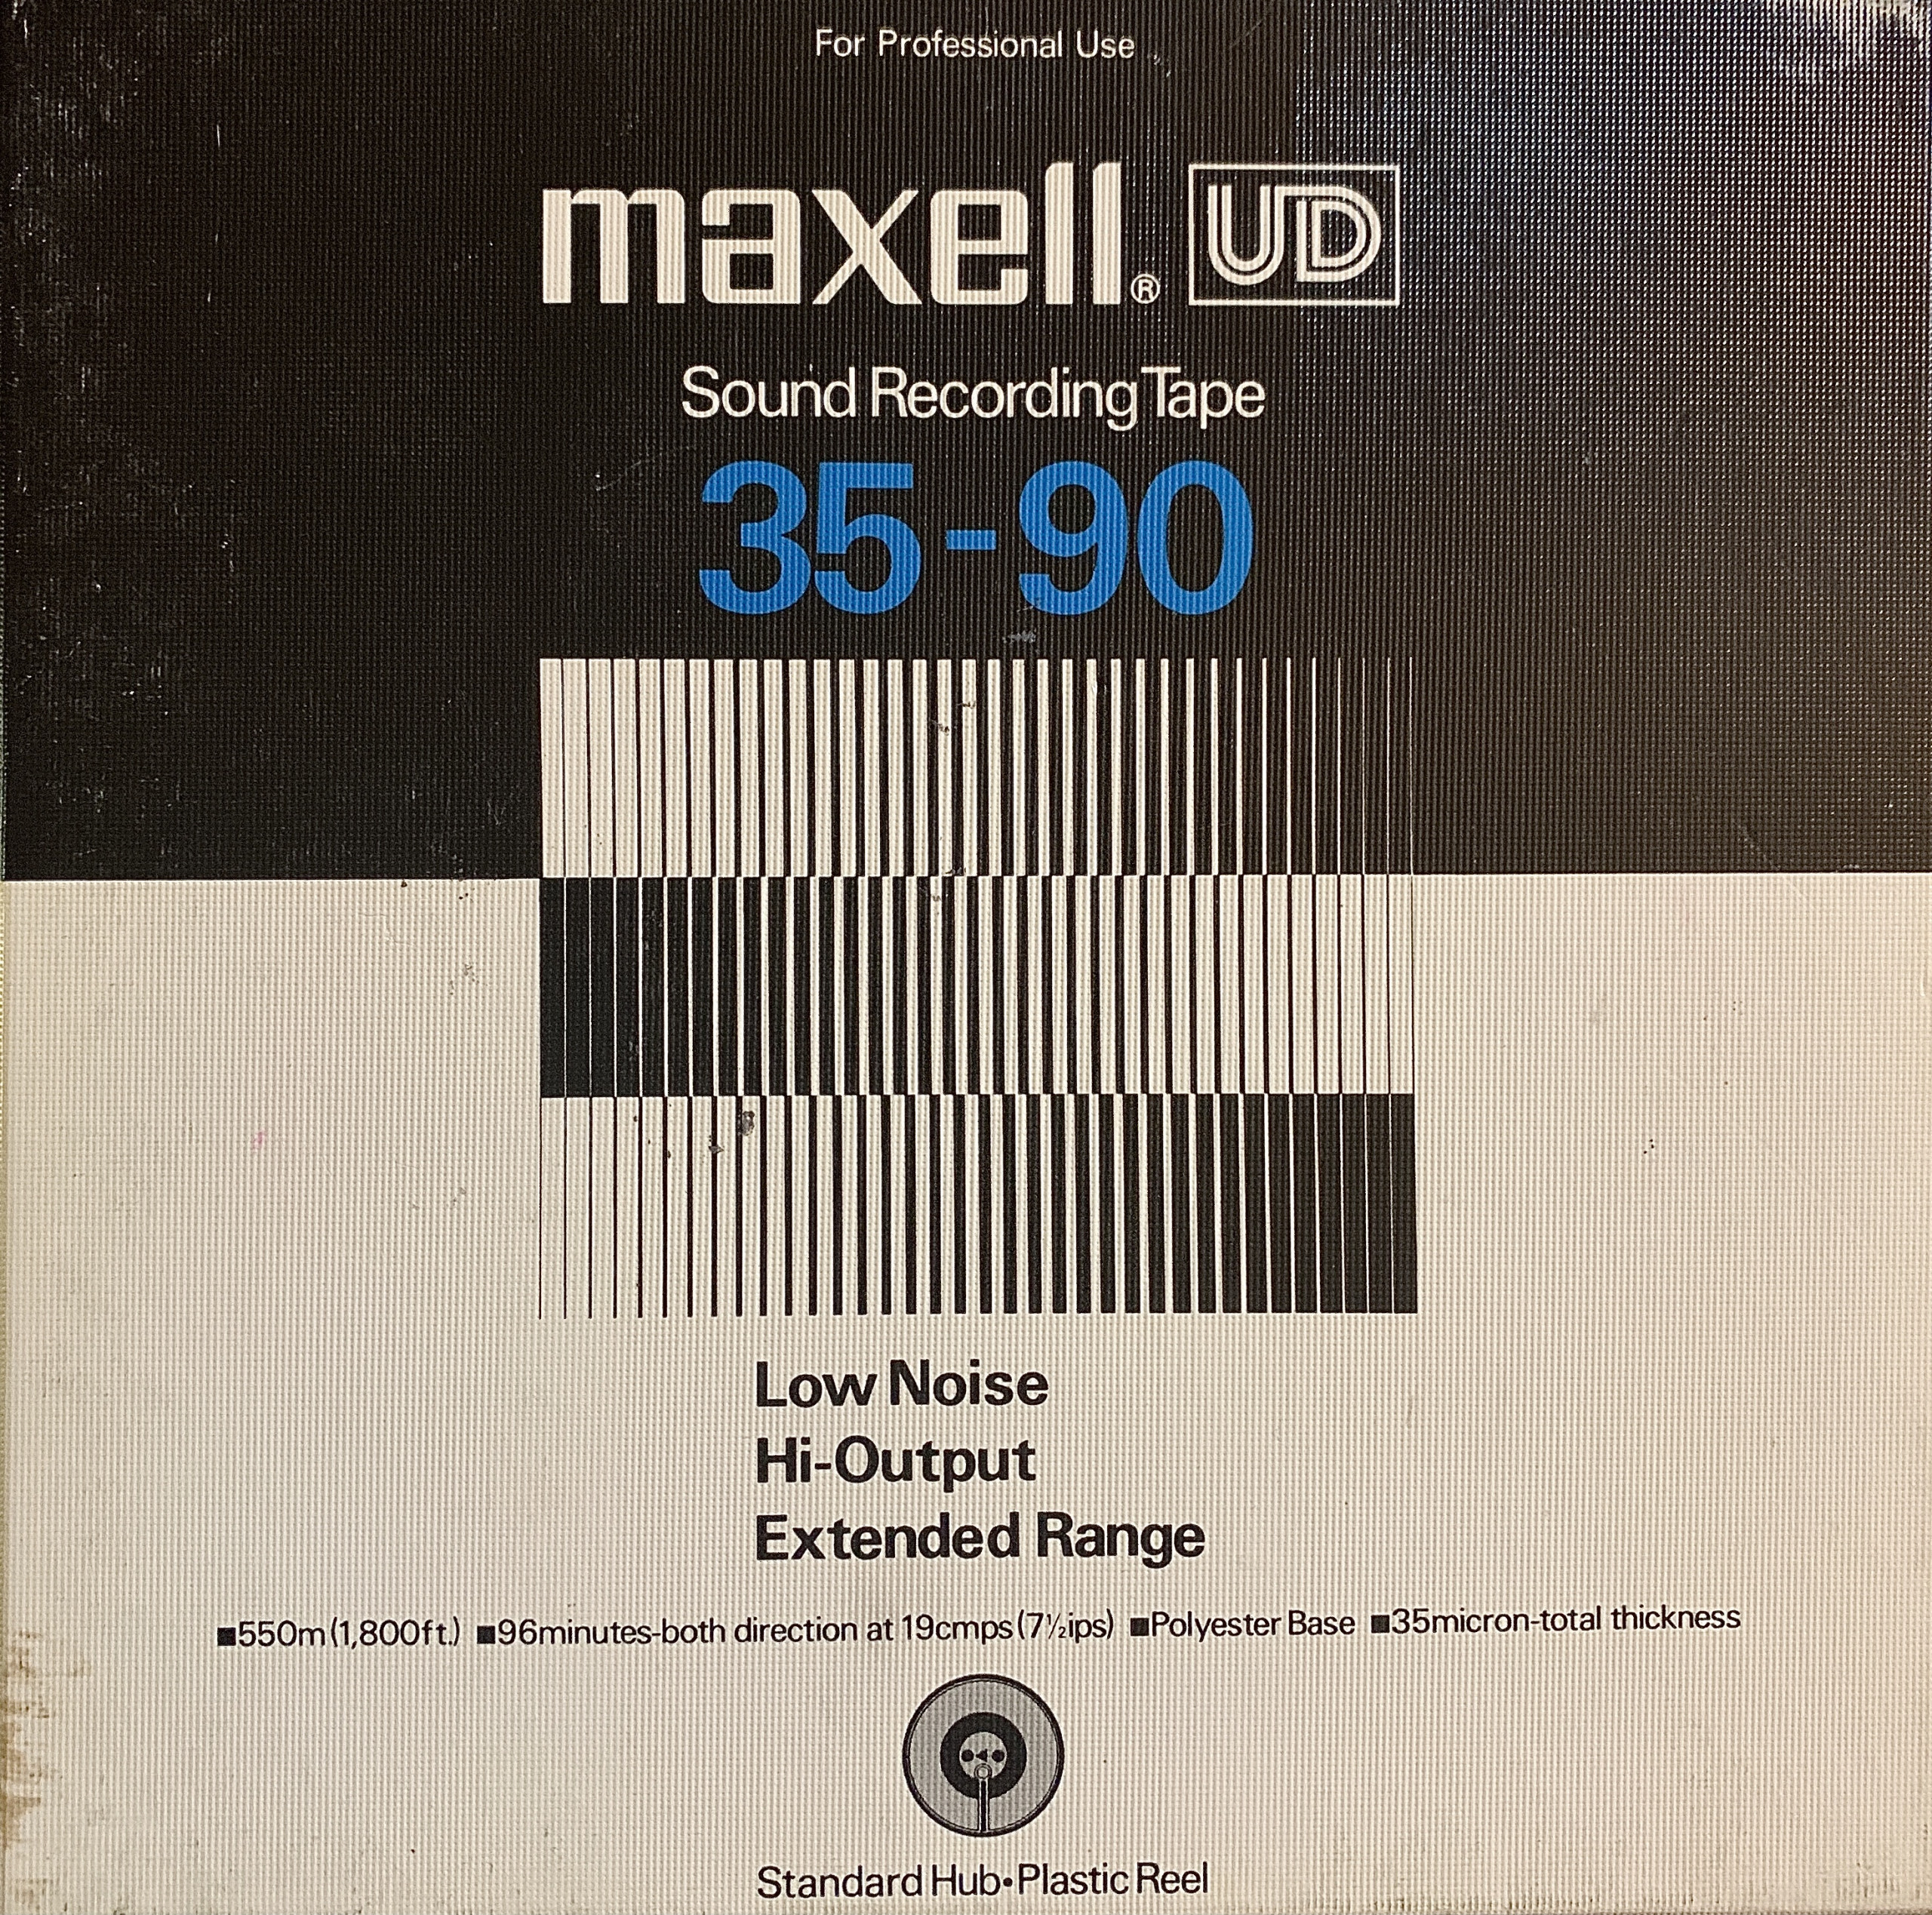 Brand New factory sealed NOS Maxell Factory sealed 7” Reel And